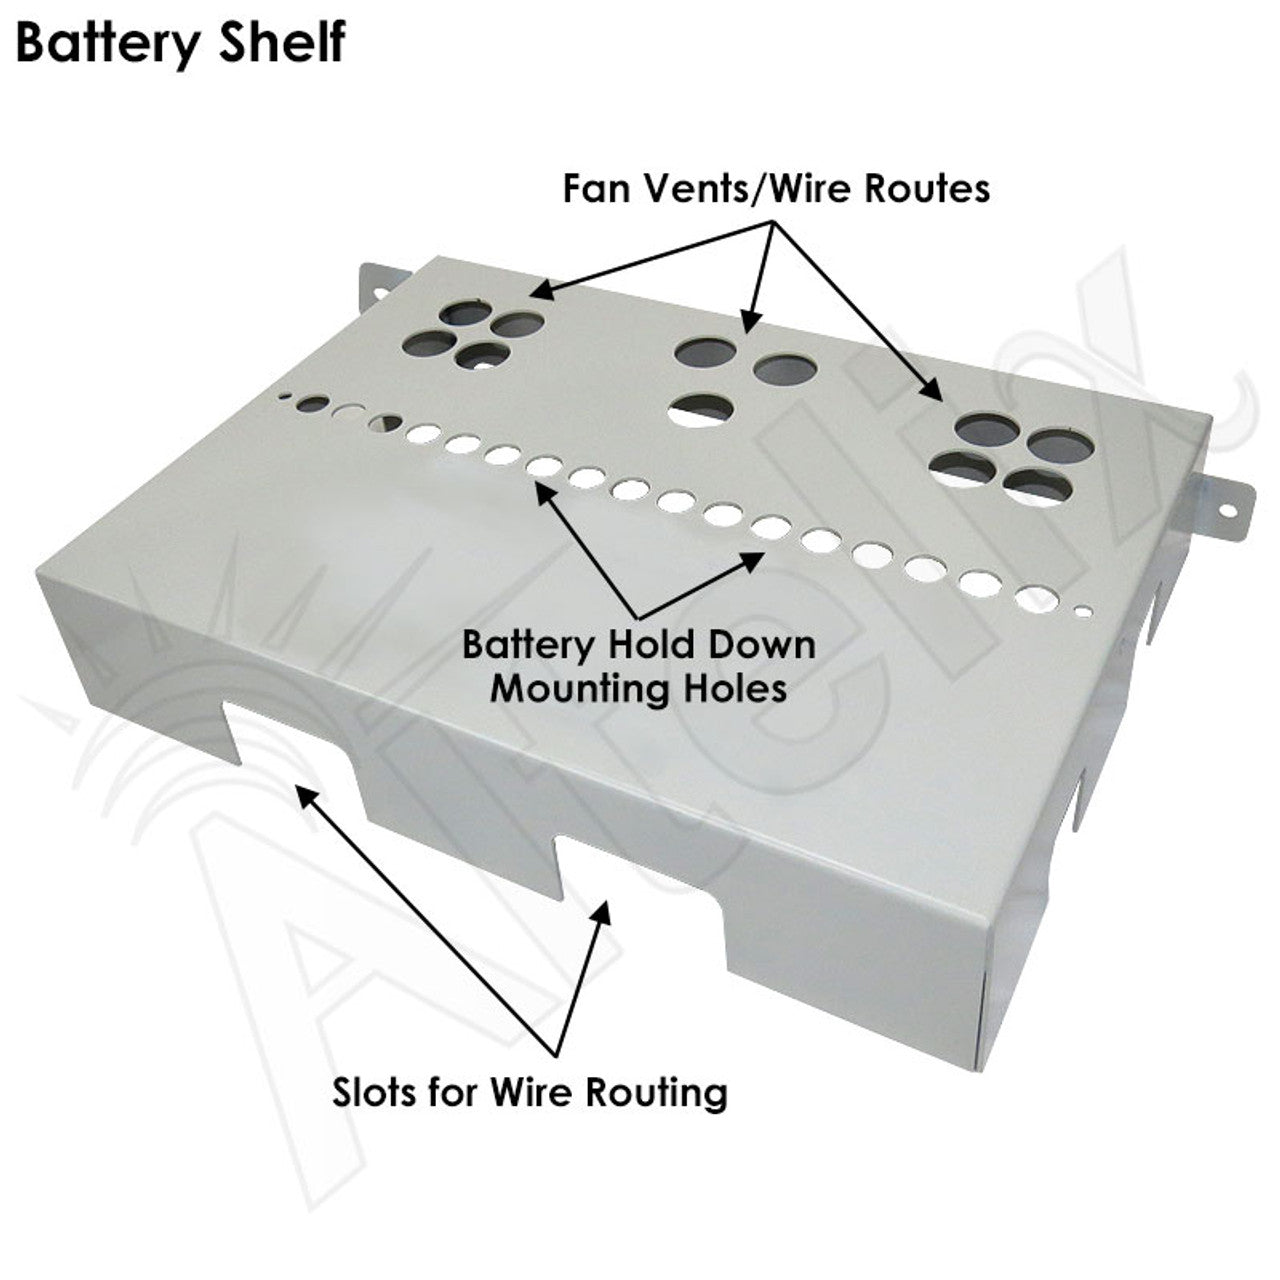 Steel Battery/Utility Shelf with Adjustable Battery Hold Down for NS Enclosures - 0